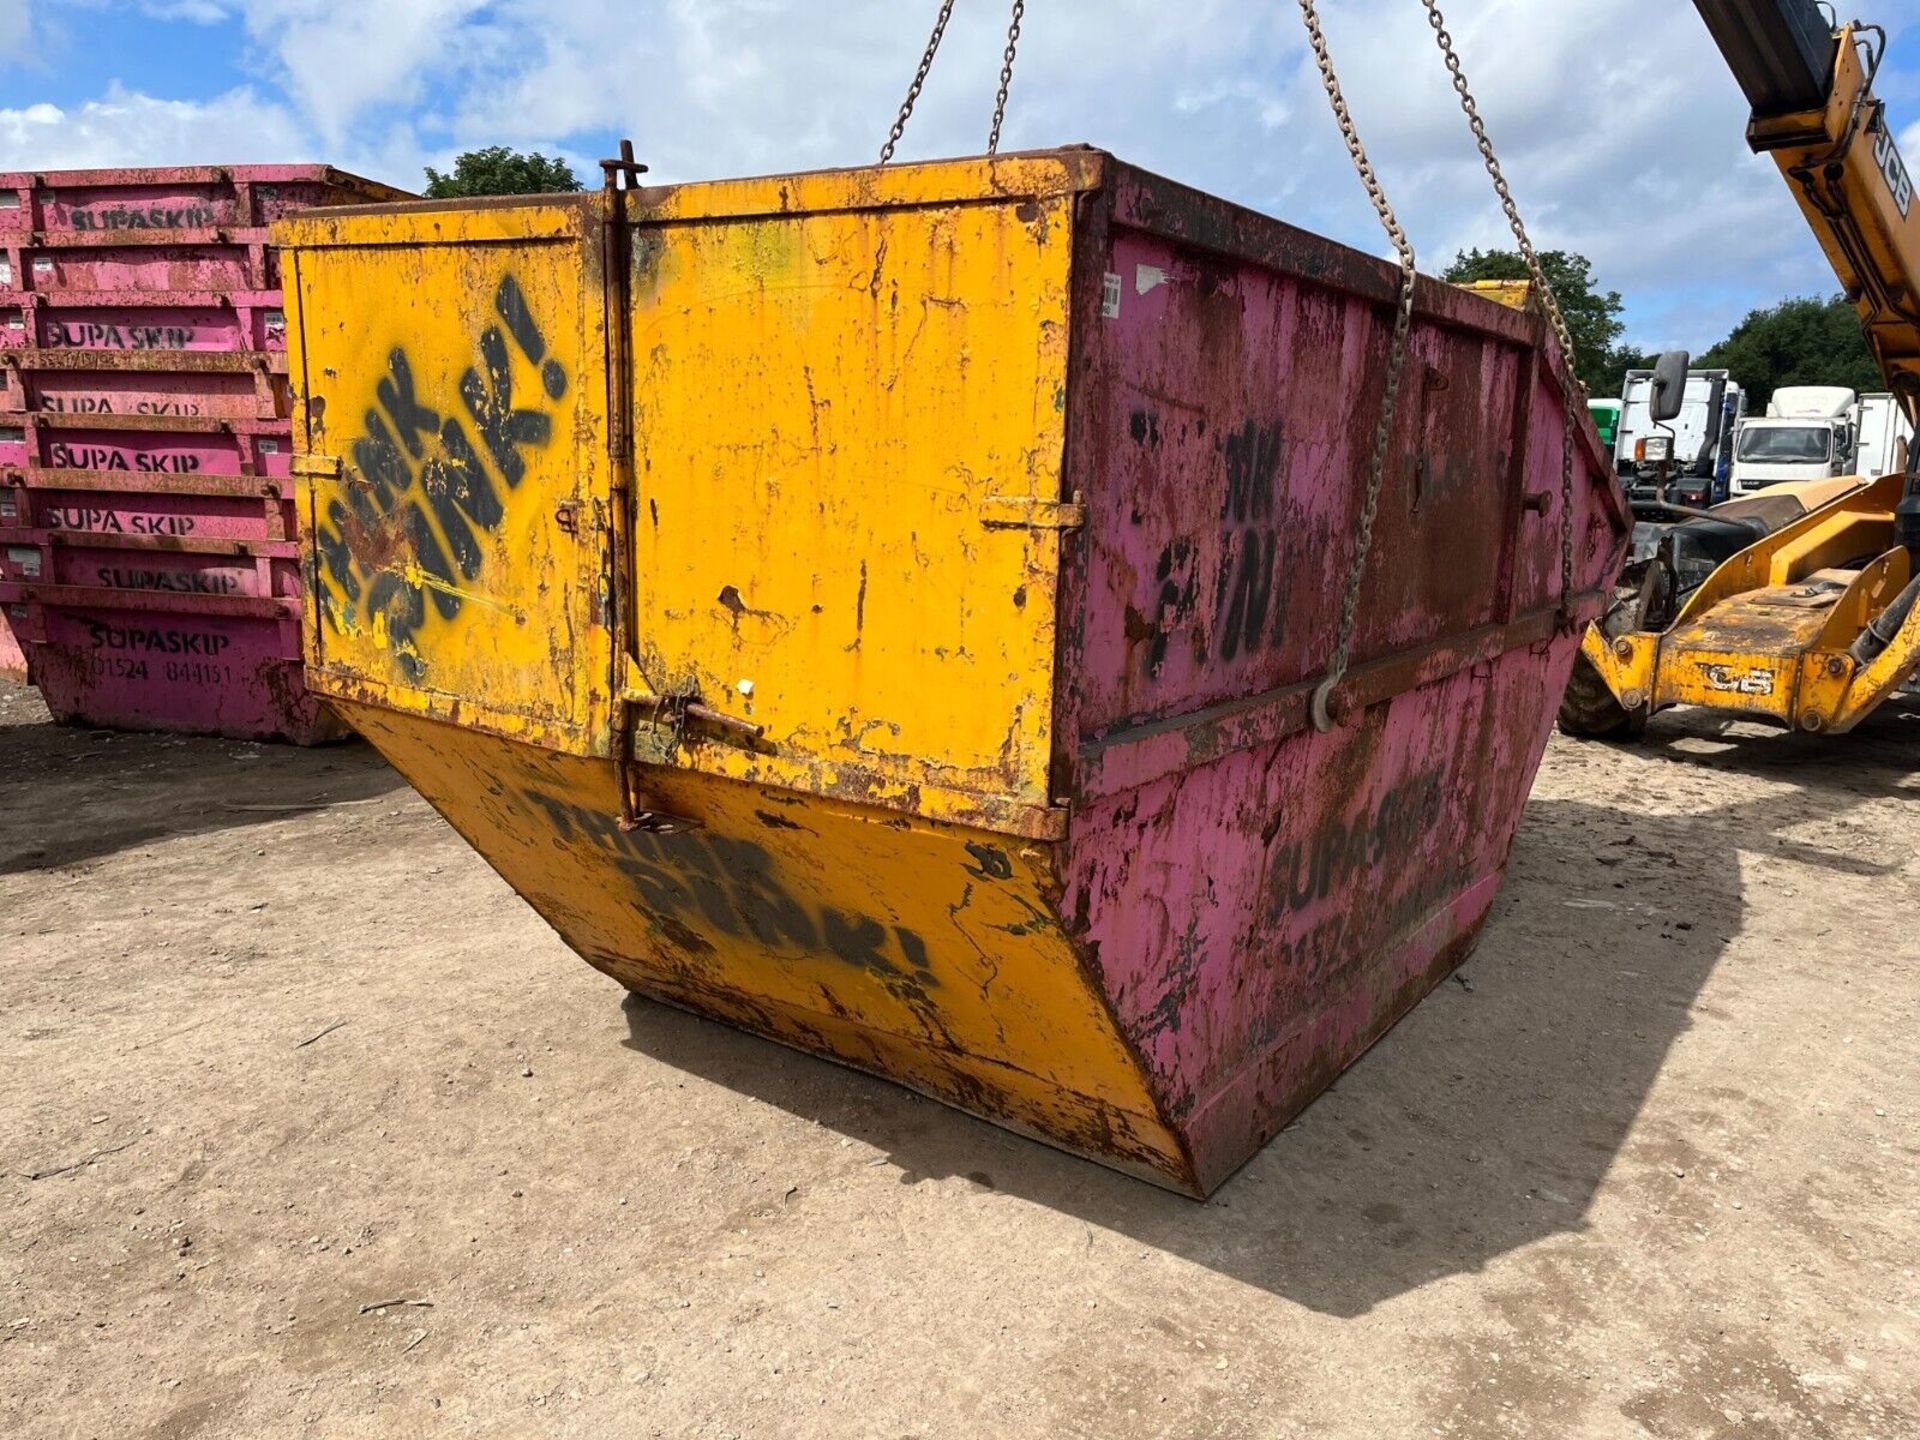 14 YARD CHAIN SKIP WAGON TRUCK AUCTION IS FOR 1 X SKIP IN USEABLE CONDITION - Image 6 of 6